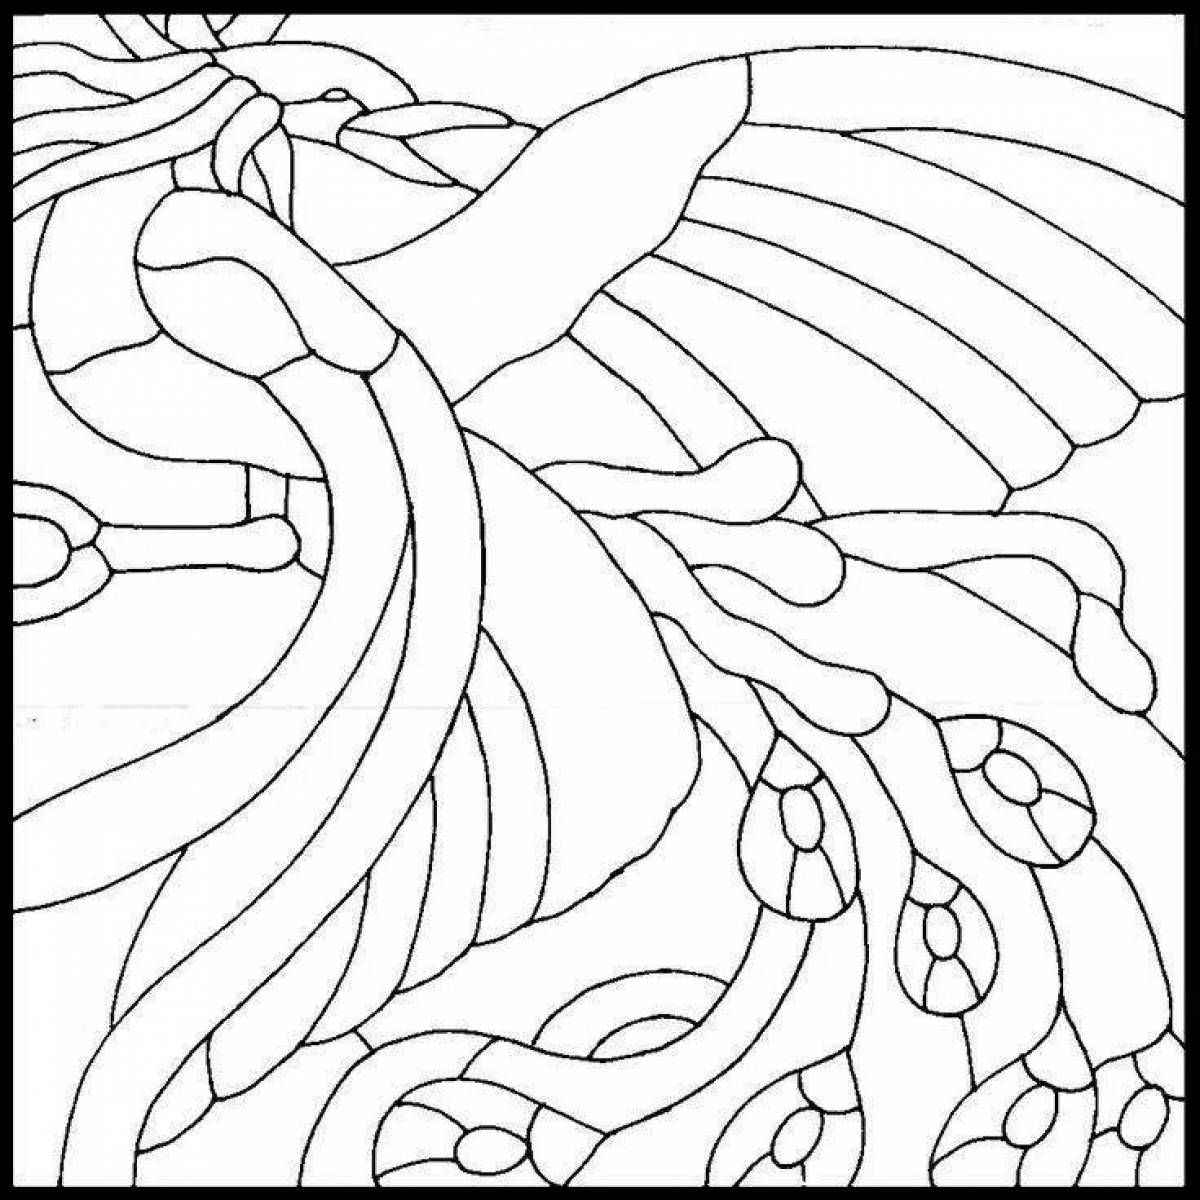 Rampant stained glass coloring page